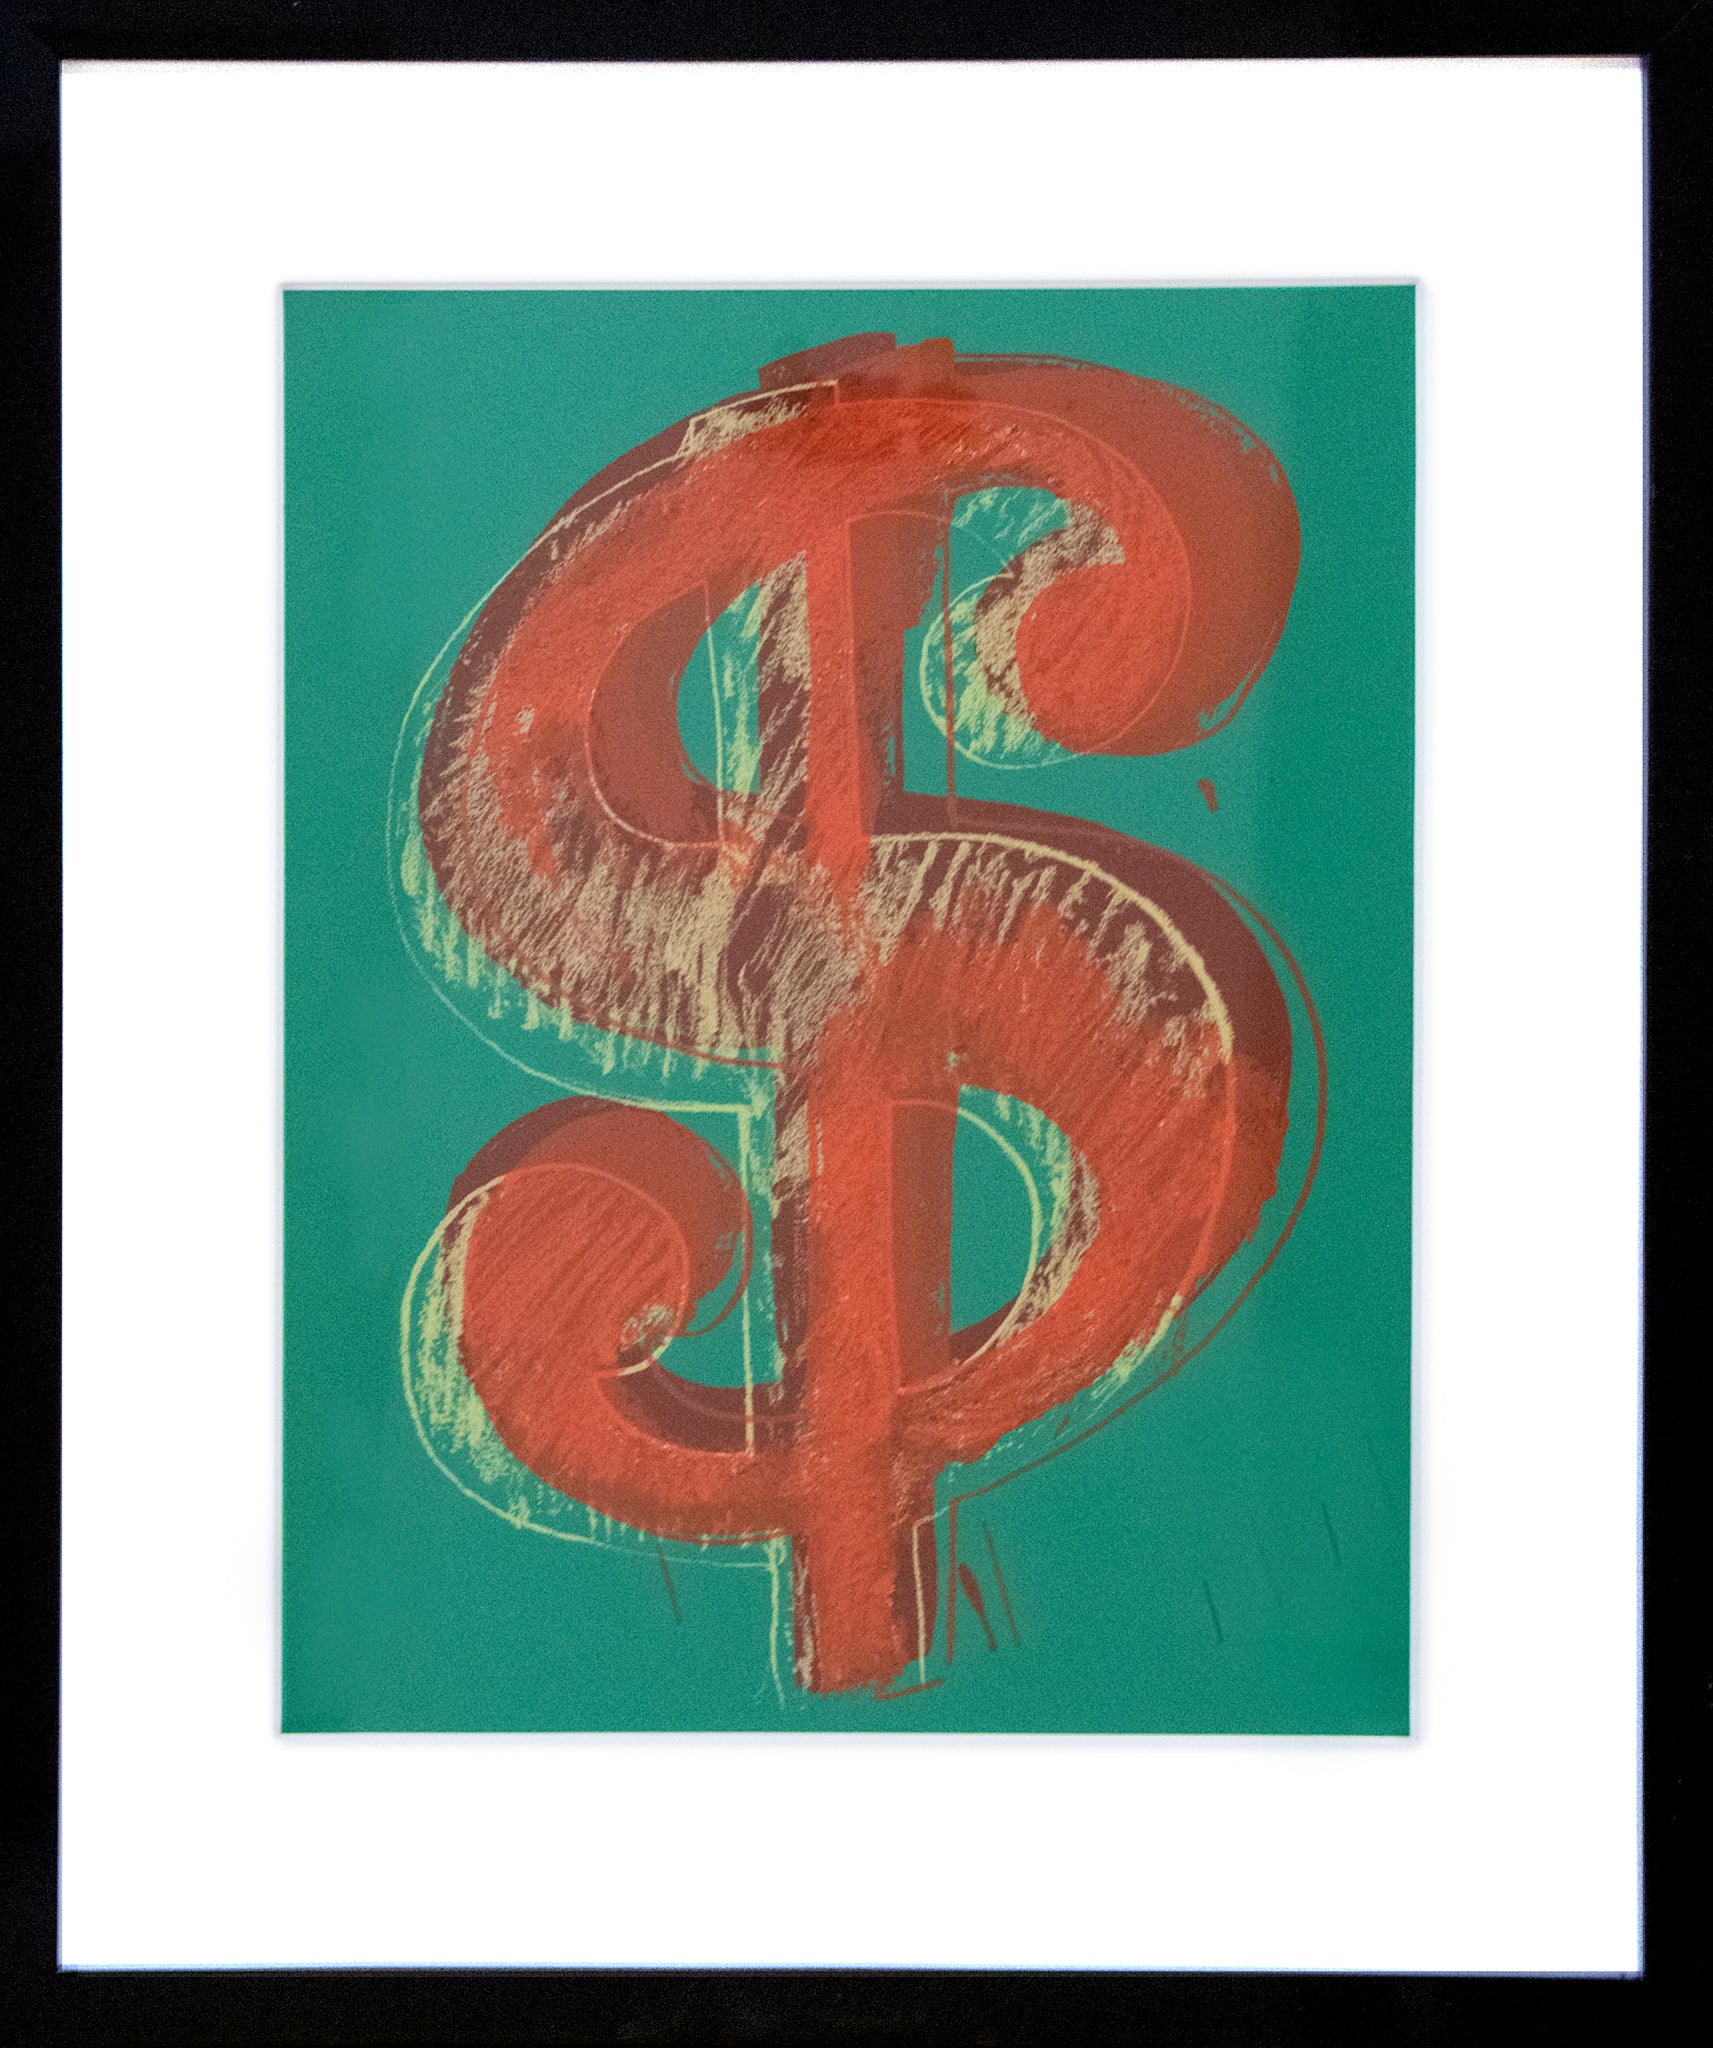 Warhol, Andy "Red Dollar Sign on Green"